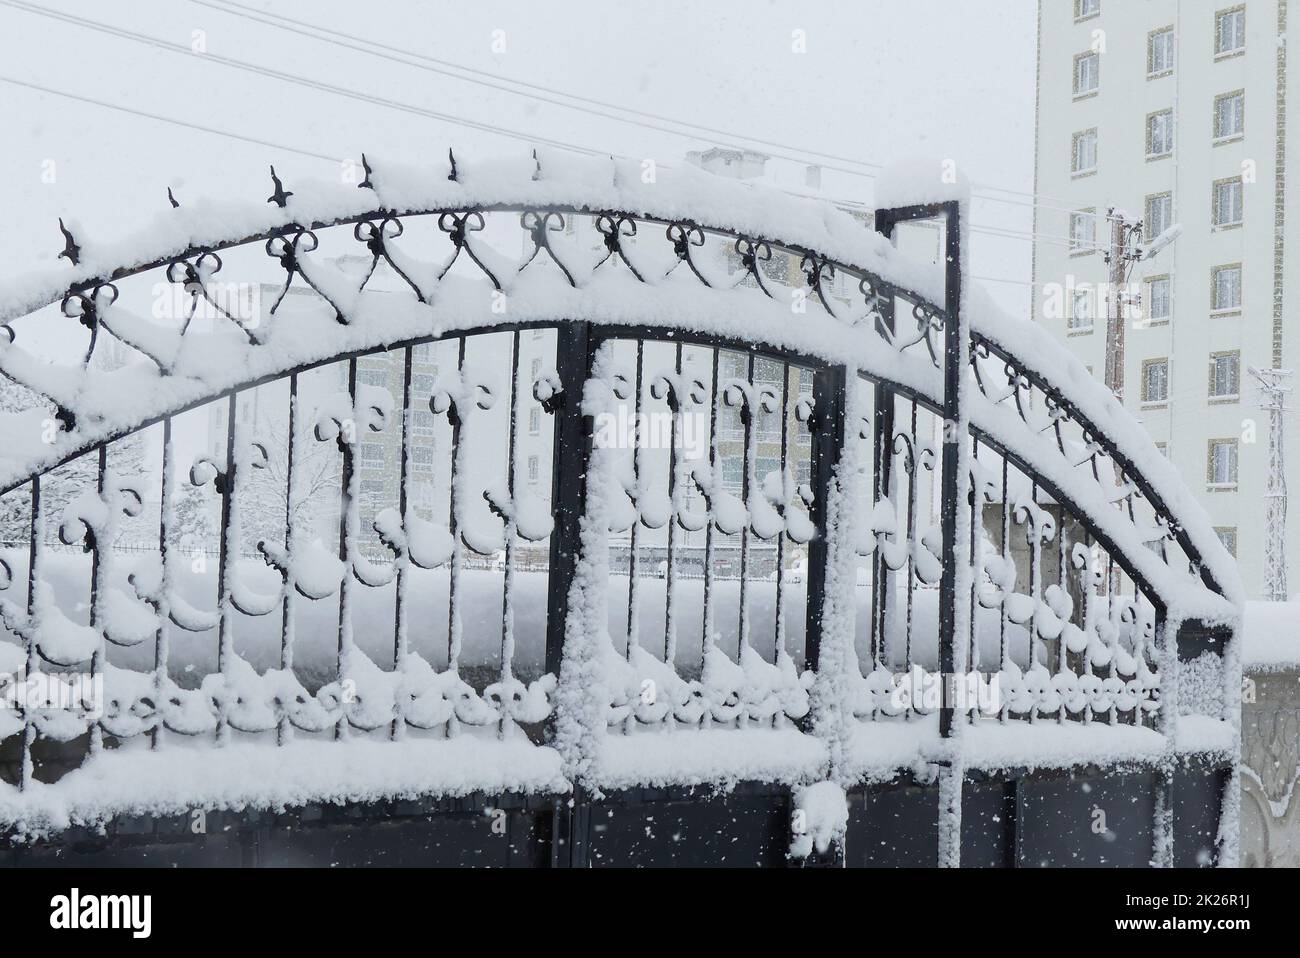 snow landscapes in winter, snow falling on the iron gate, wonderful images created by snow, snow landscapes Stock Photo